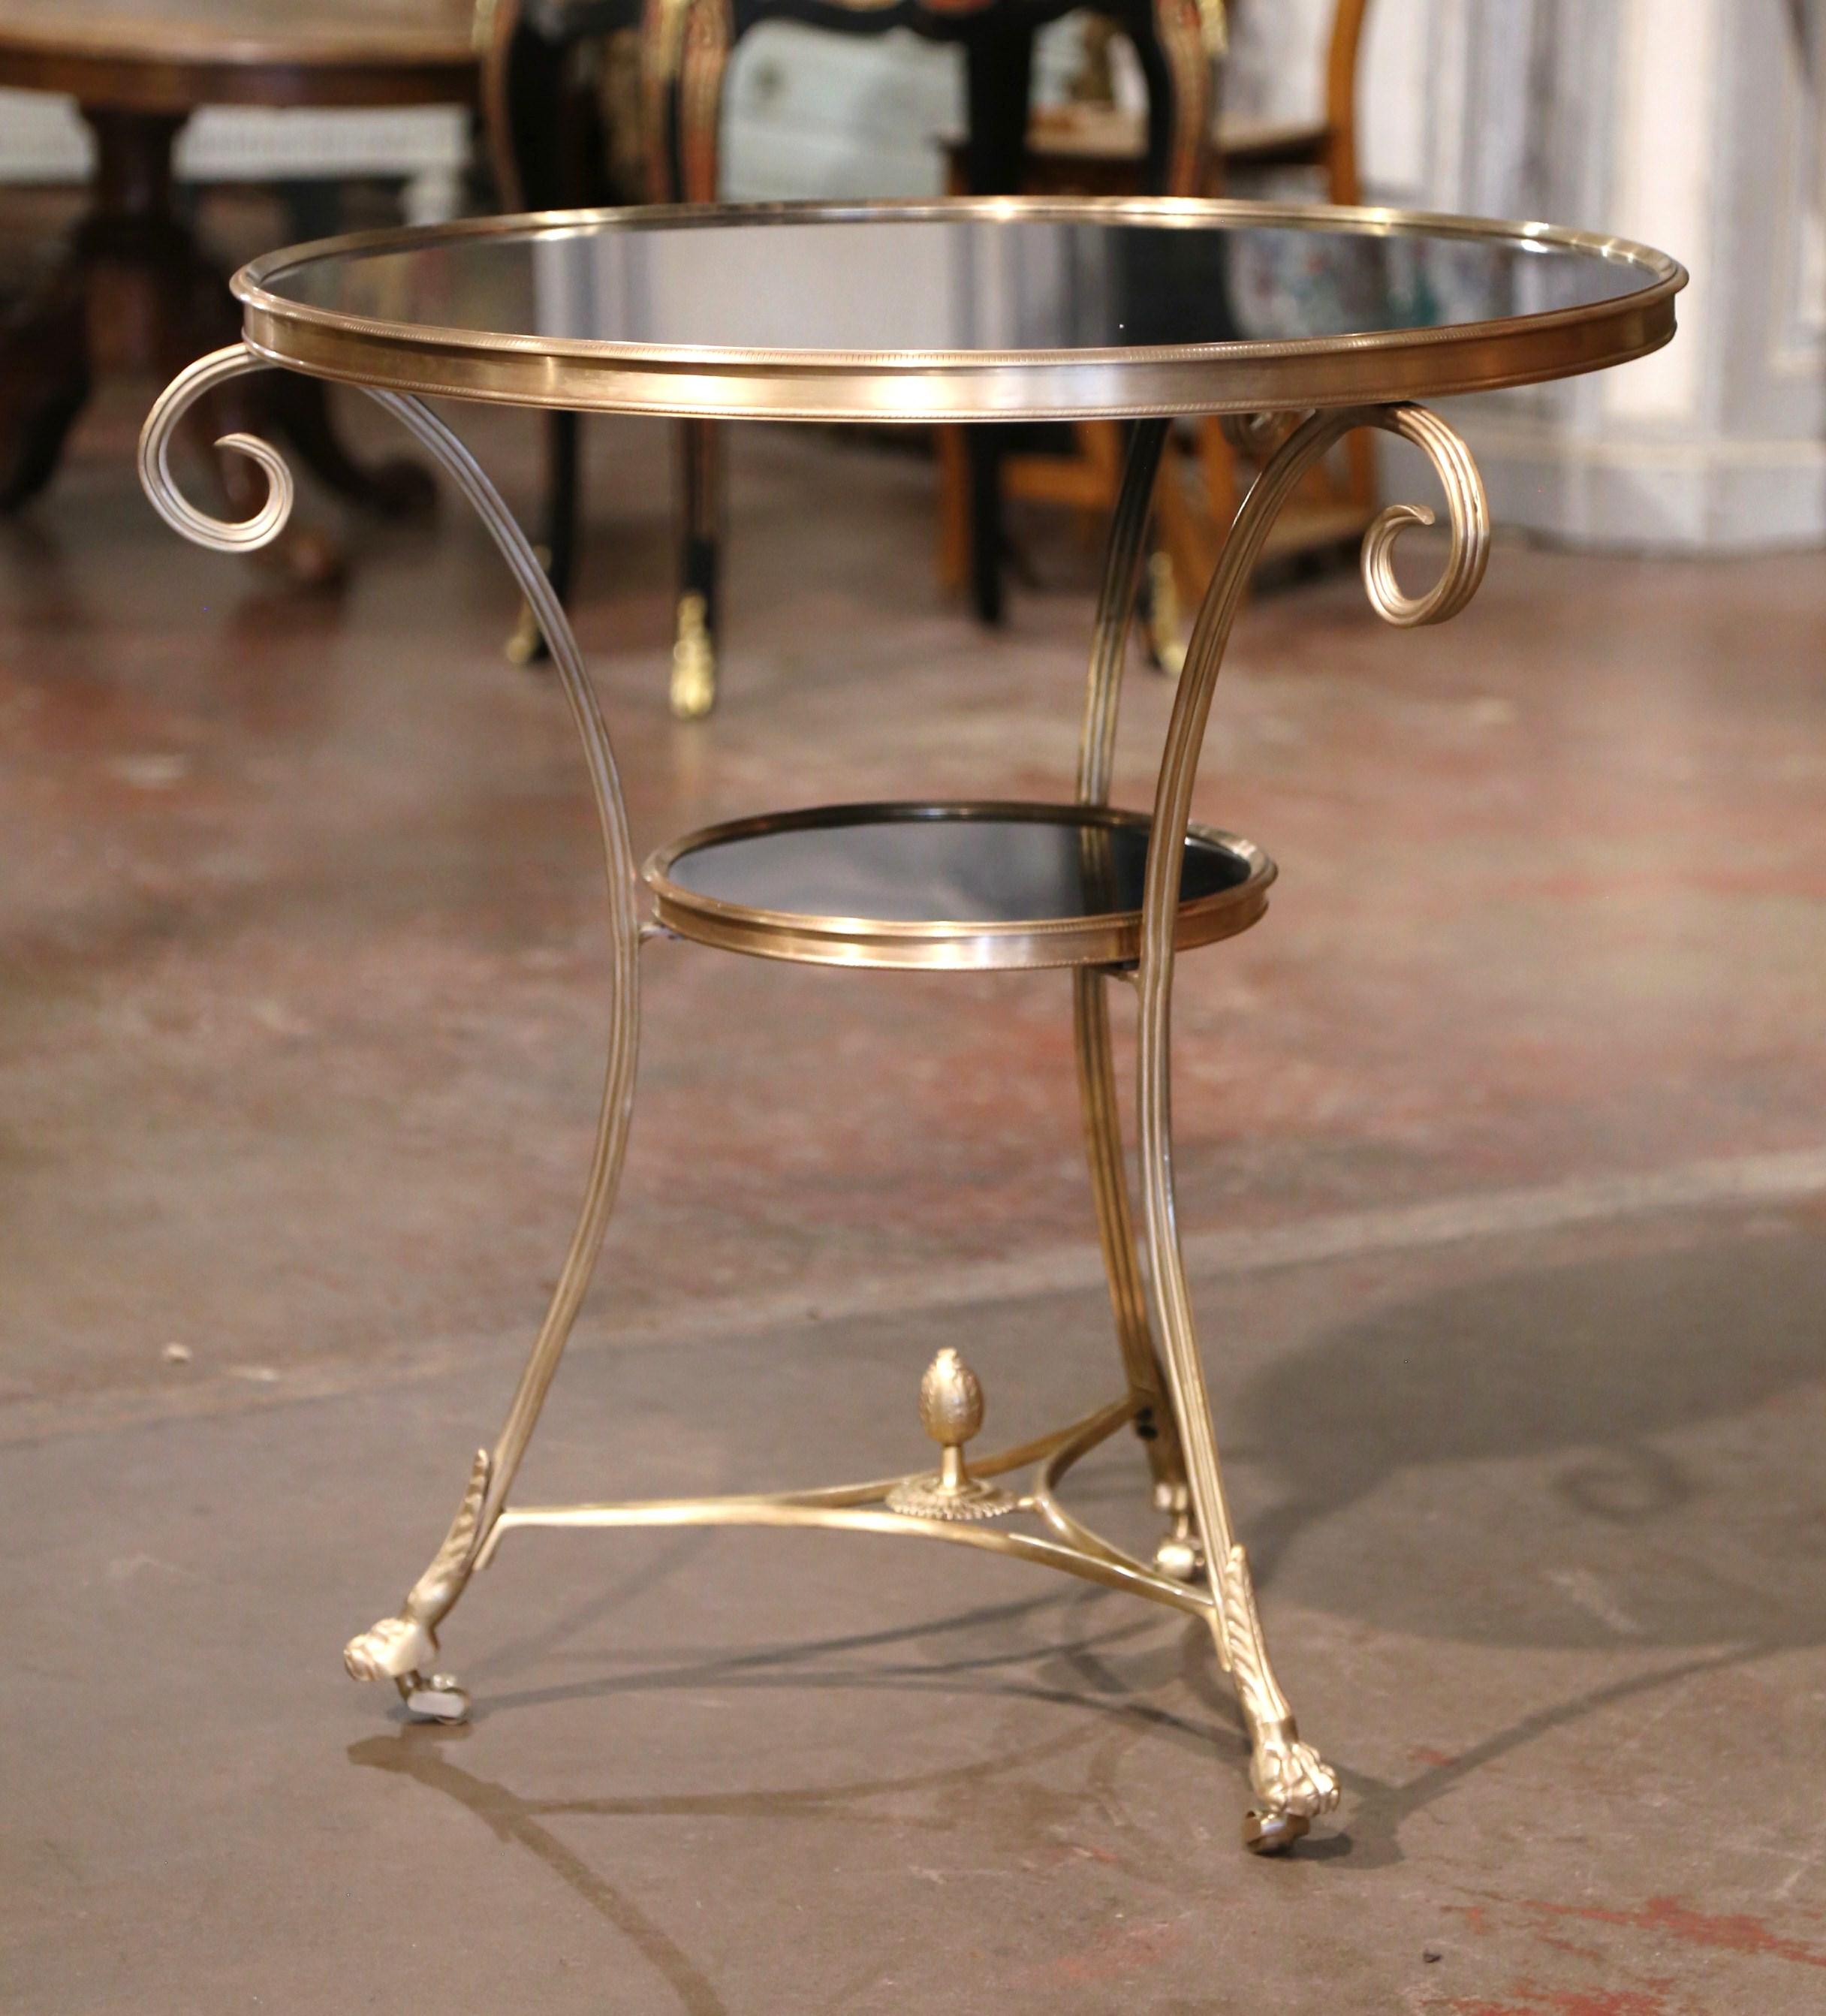 Decorate a living room with this elegant neoclassical antique two-tier gueridon table. Created in France circa 1970, and round in shape, the table is supported by three slender cabriole legs with hoof feet decorated with acanthus leaf motifs, and